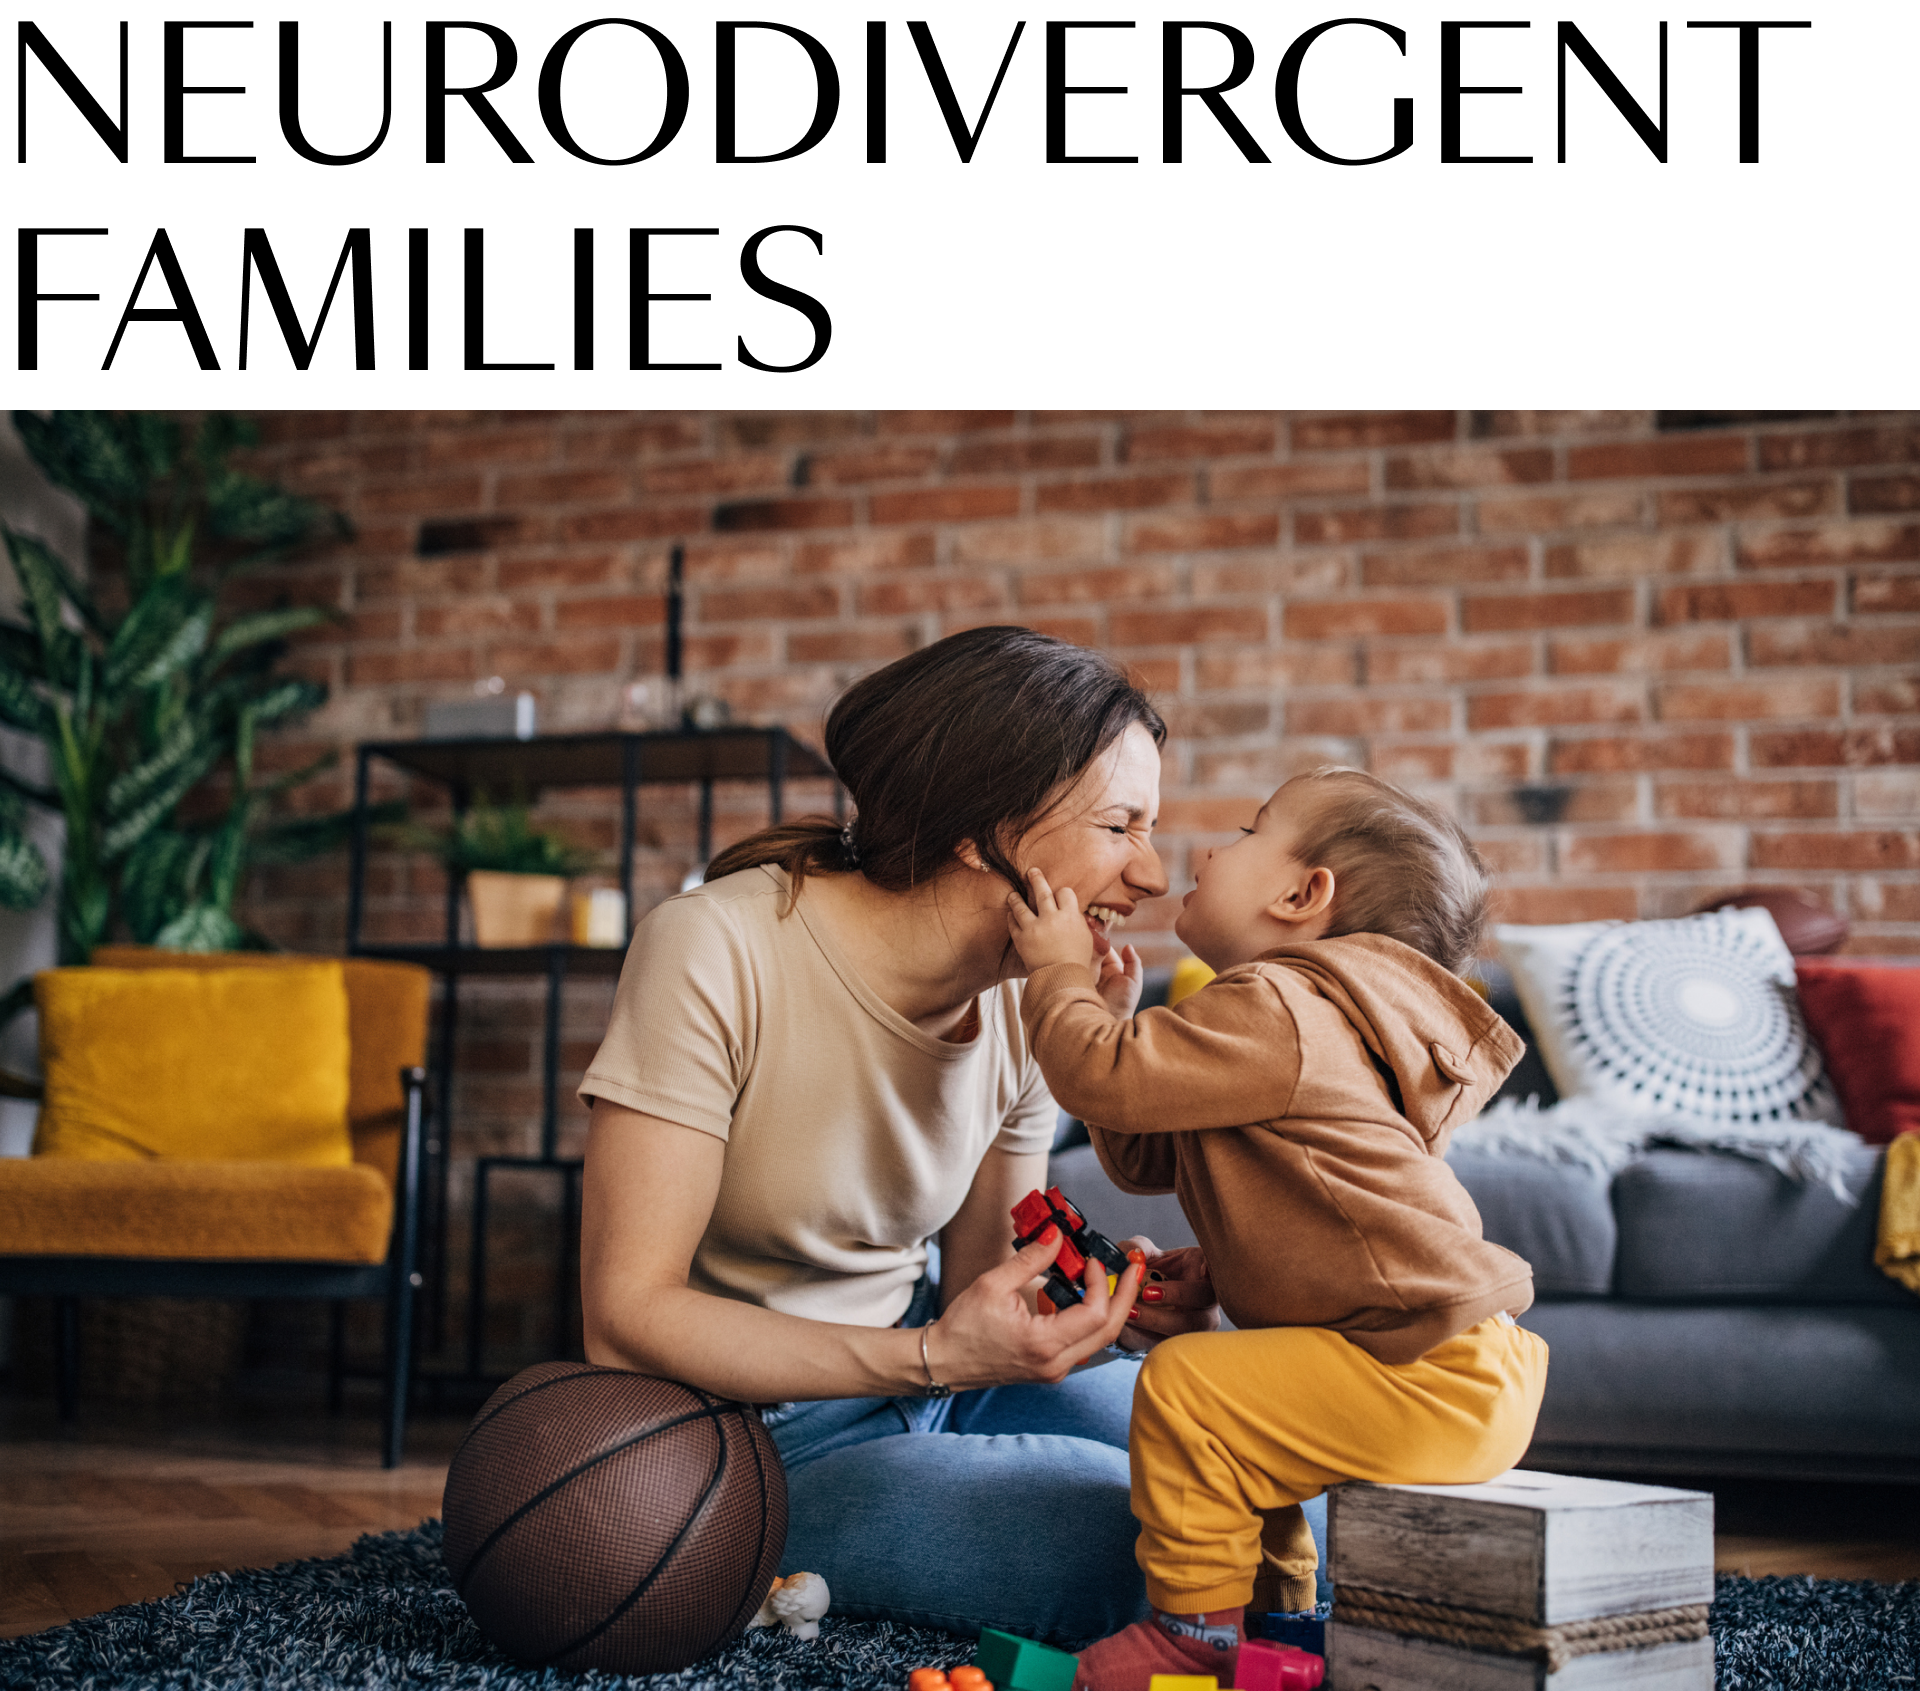 A woman playing with her child. Text reads "Neurodivergent Families"